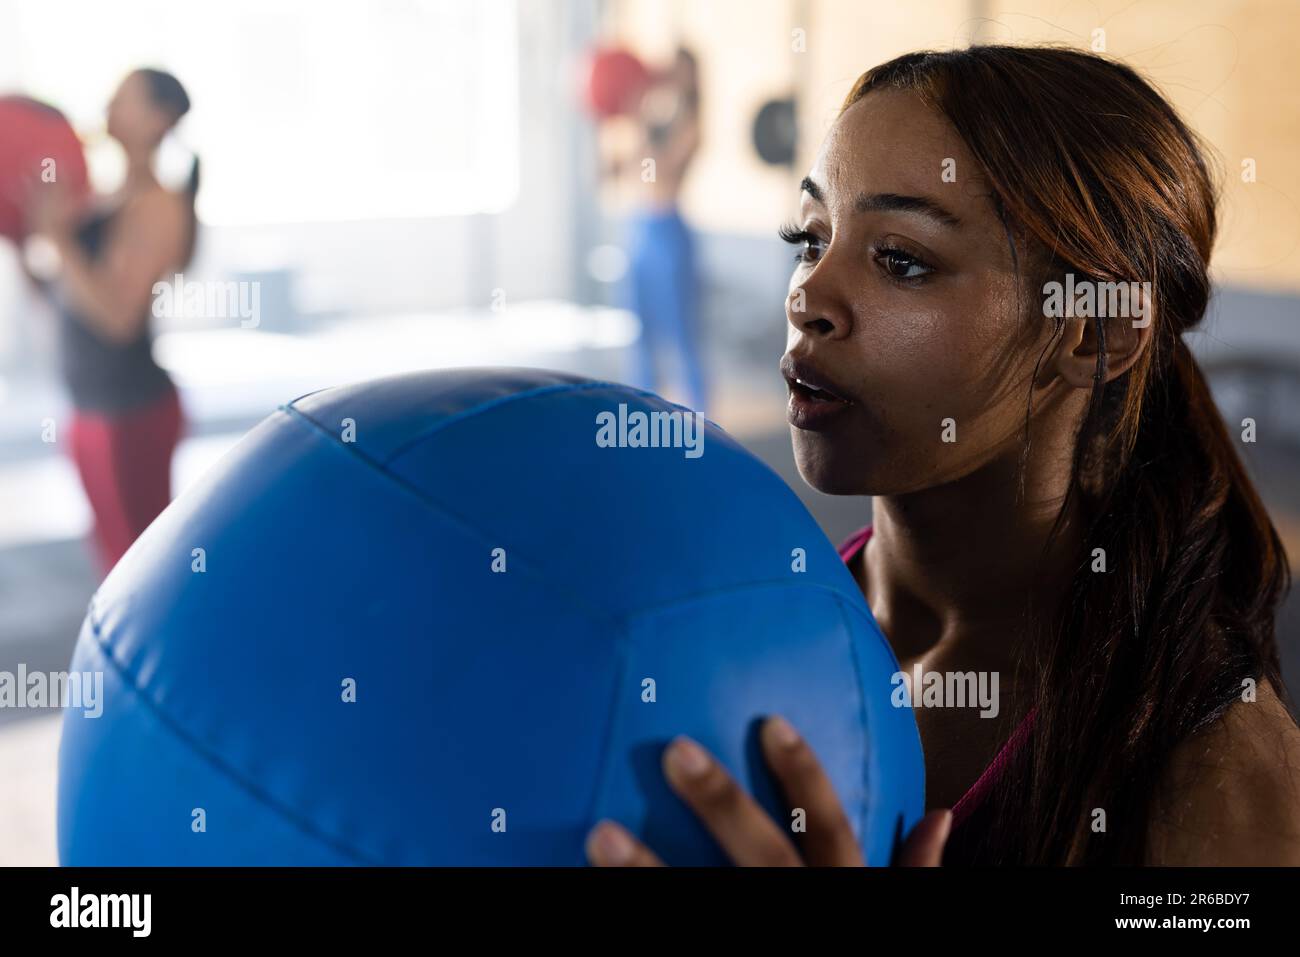 Confident biracial young woman exercising with blue fitness ball in heath club, copy space Stock Photo